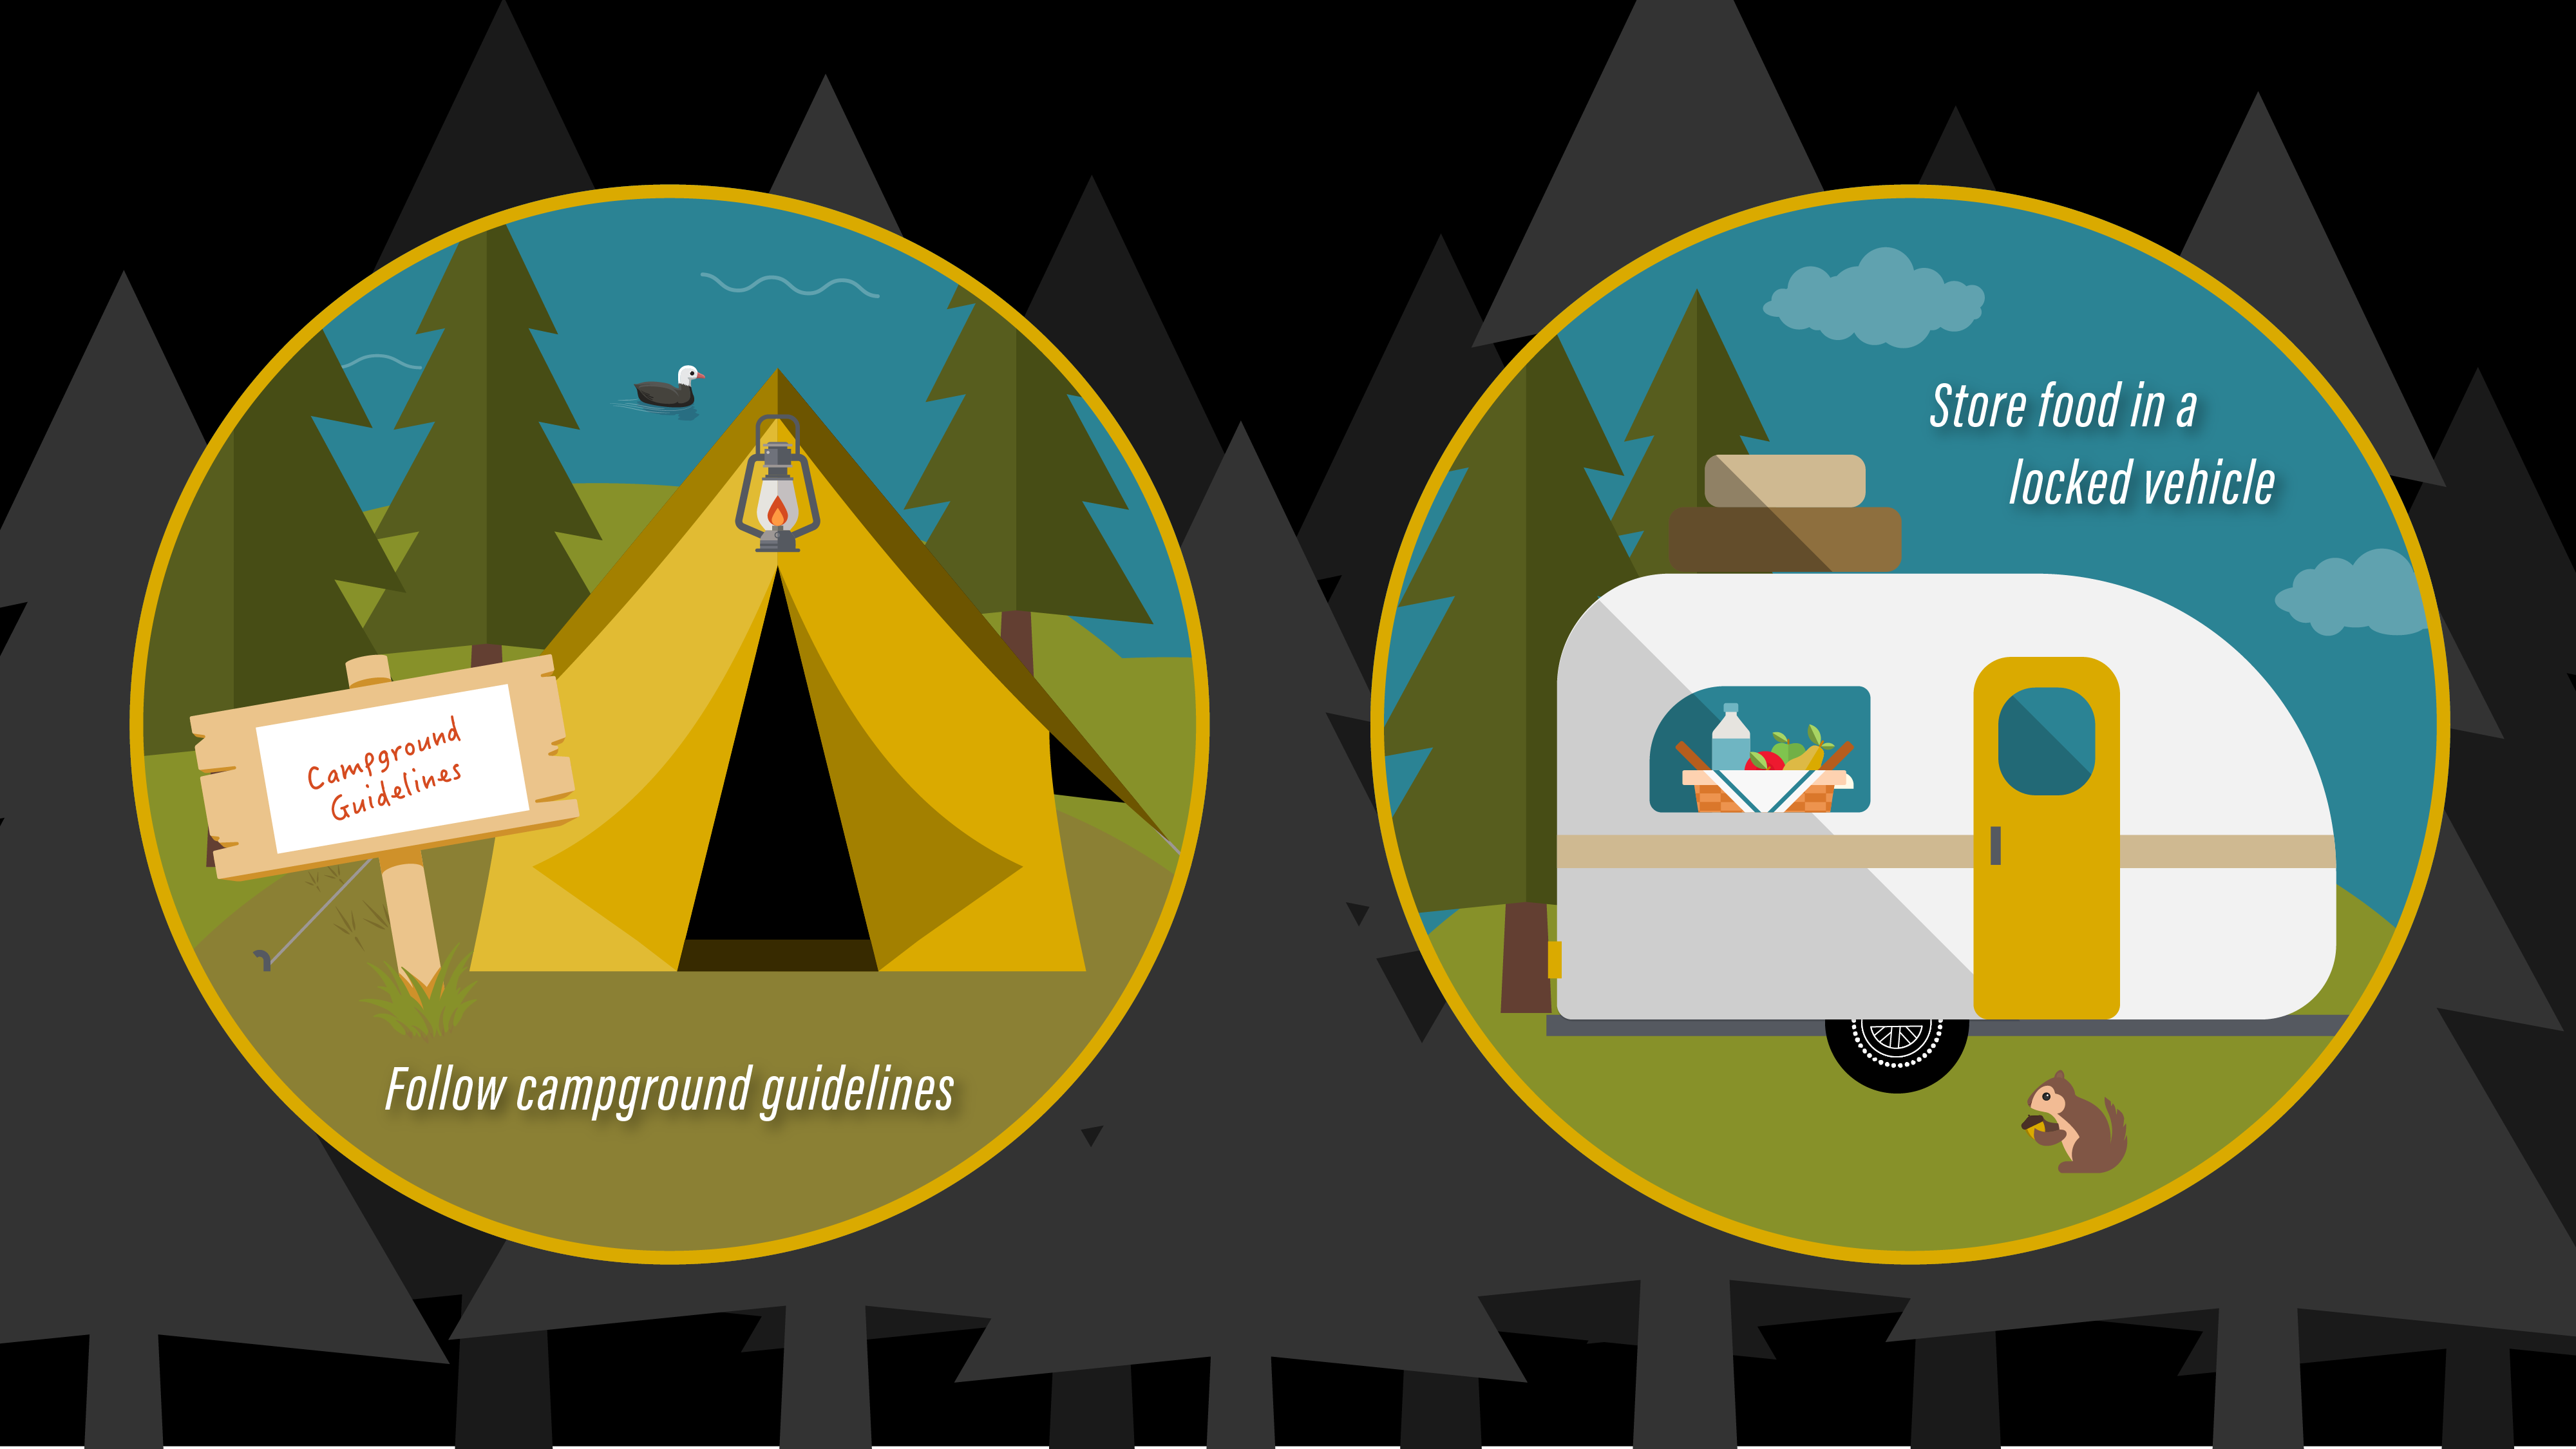 follow campground guidelines, store food in a locked vehicle